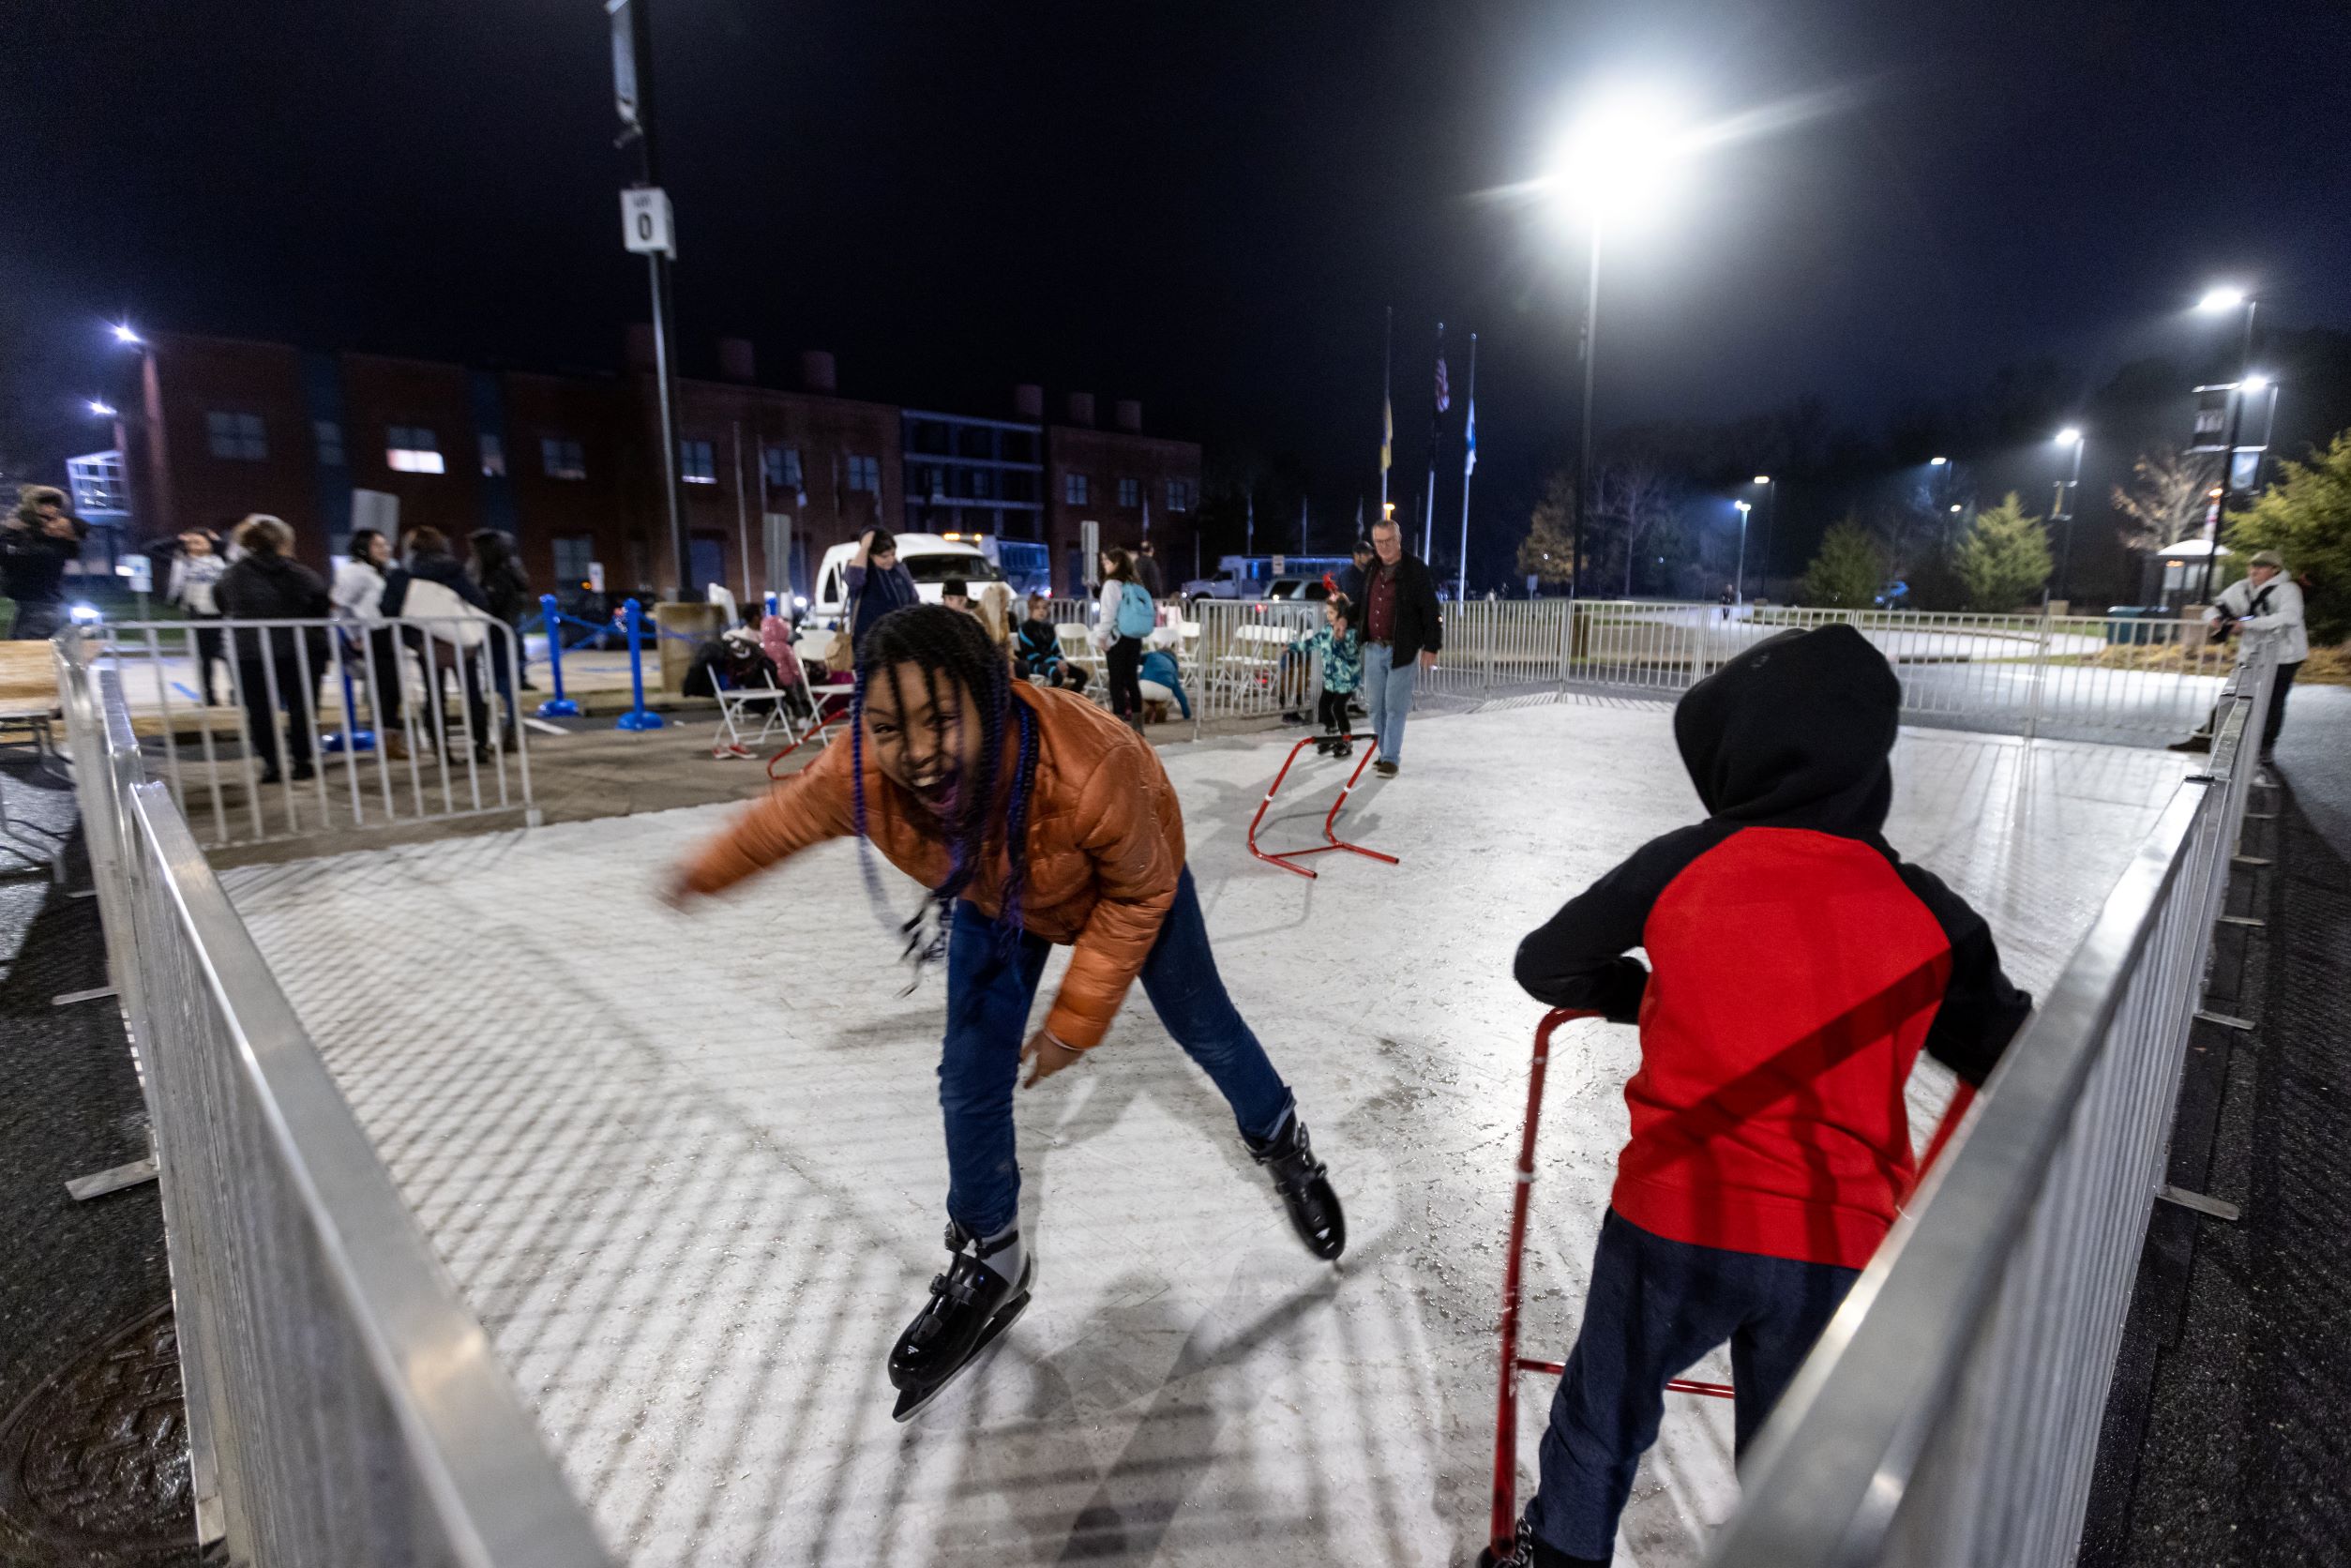 Alumni and their families enjoy the ice skating rink at the second annual Winter Tree-dition.